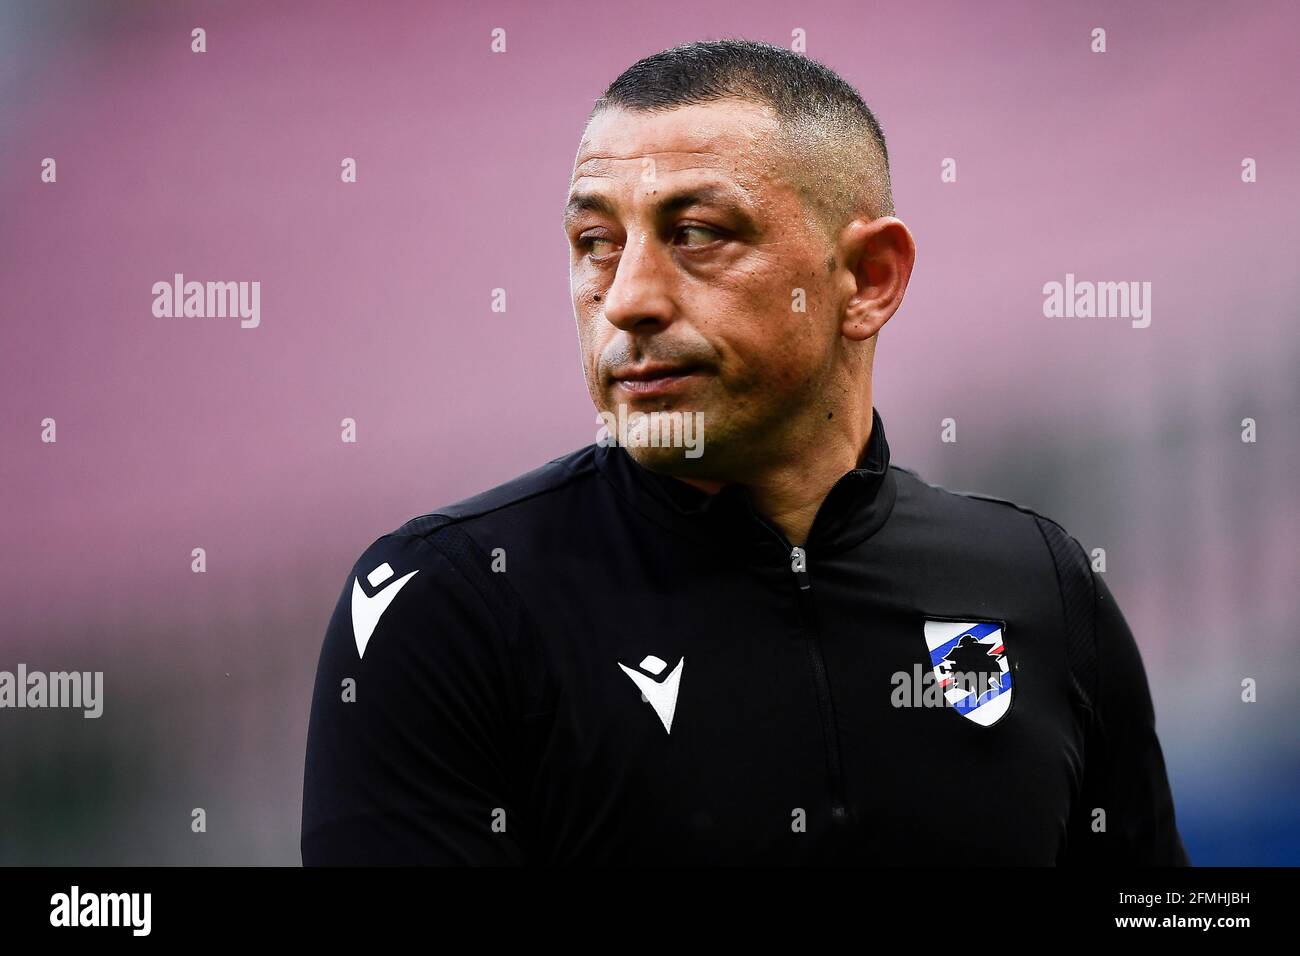 Milan, Italy. 08 May 2021. Angelo Palombo of UC Sampdoria looks on during warm up prior to the Serie A football match between FC Internazionale and UC Sampdoria. FC Internazionale won 5-1 over UC Sampdoria. Credit: Nicolò Campo/Alamy Live News Stock Photo